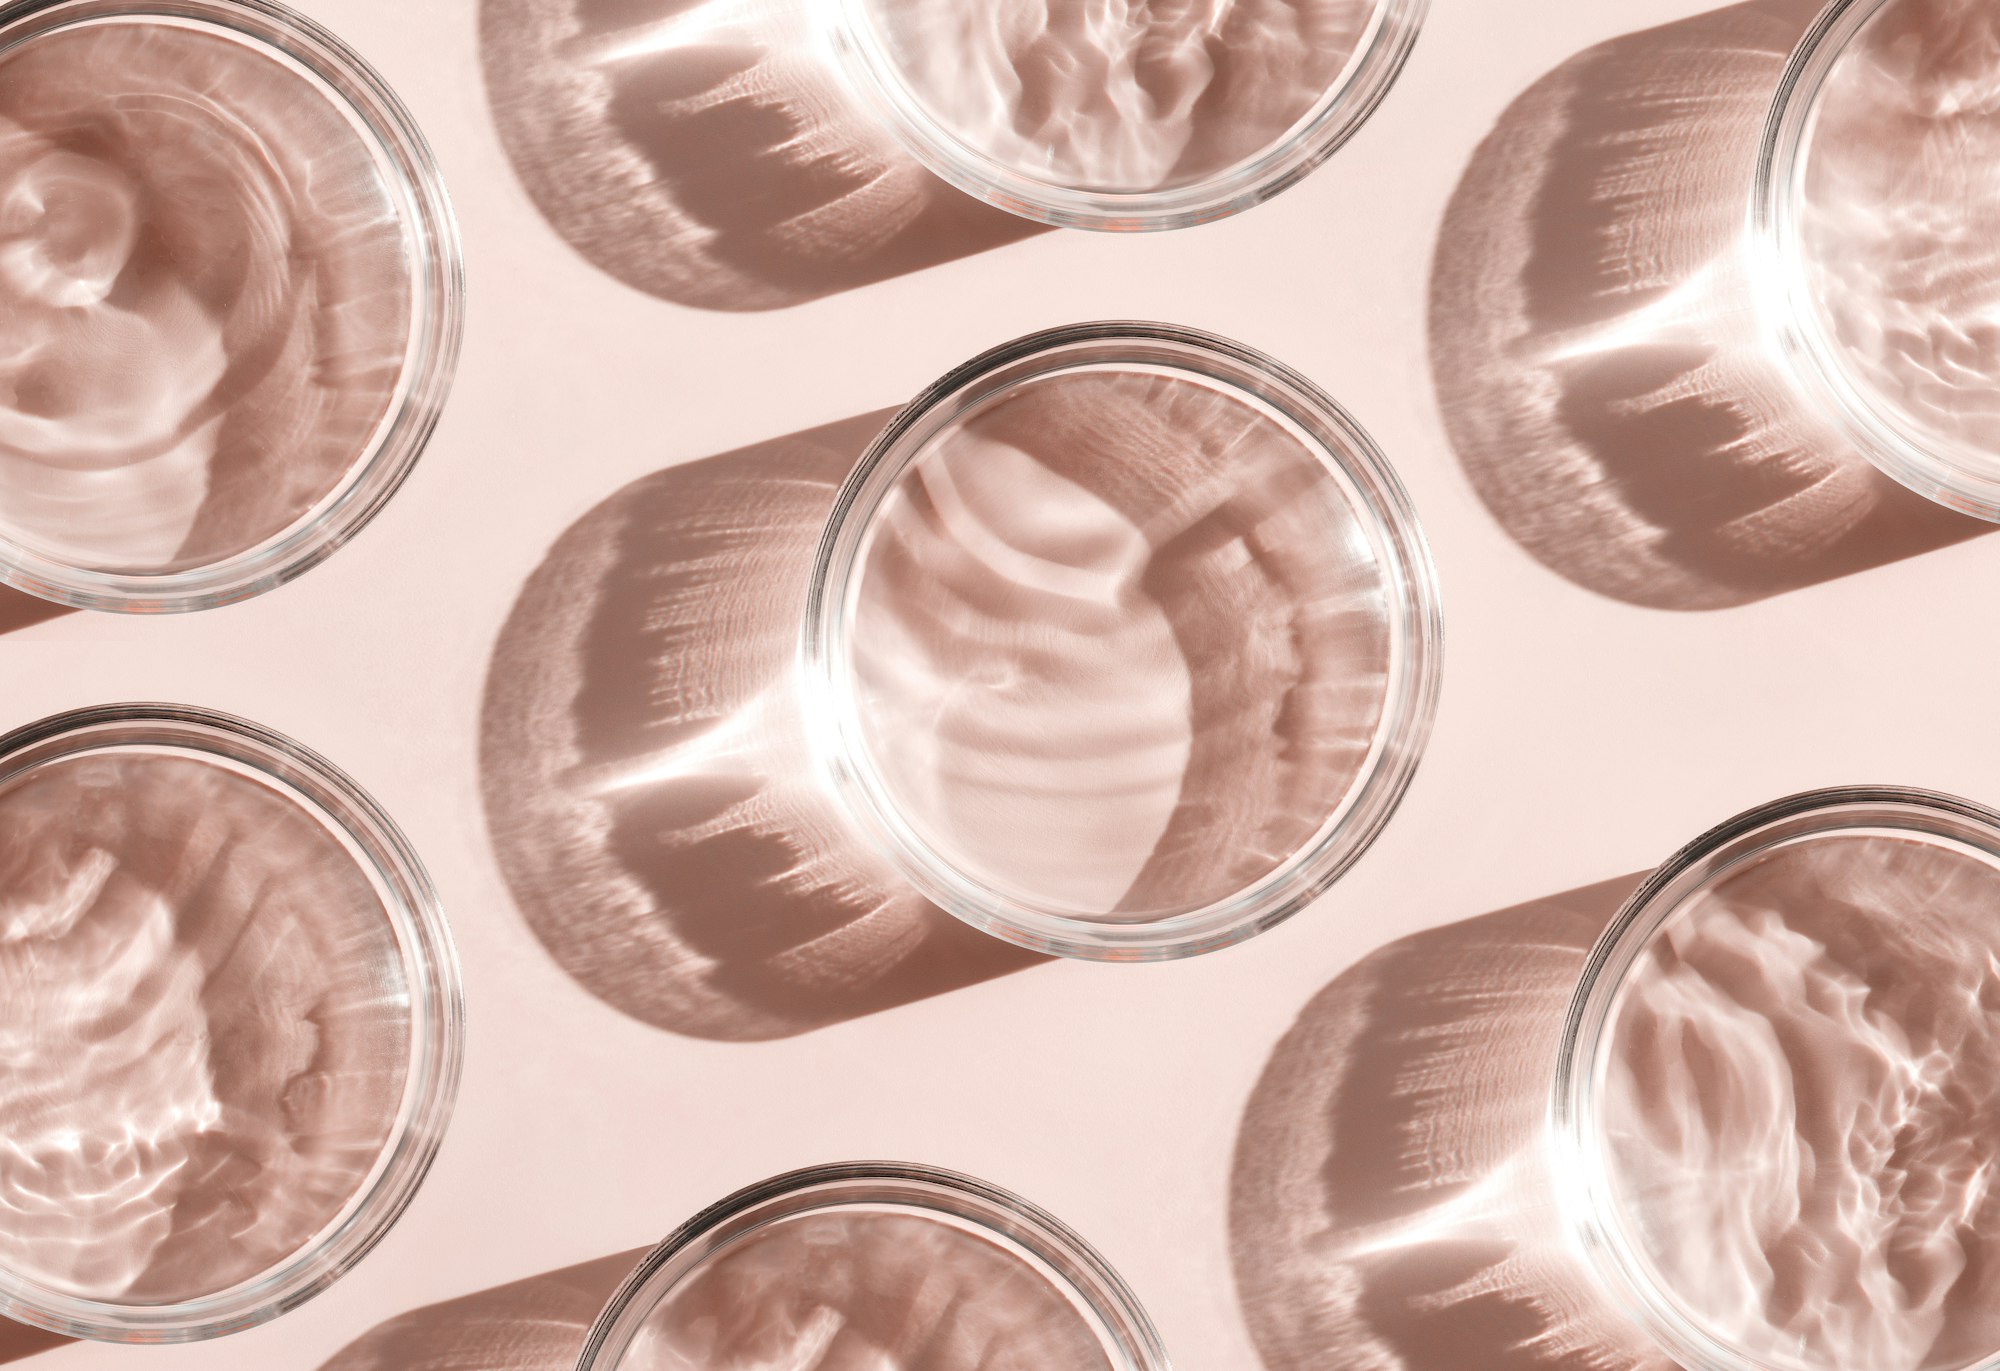 Glass cups filled with water, casting complex, wavy shadows on a pink surface, arranged in a diagonal pattern—reminiscent of the ripples seen during diligent water softener maintenance.